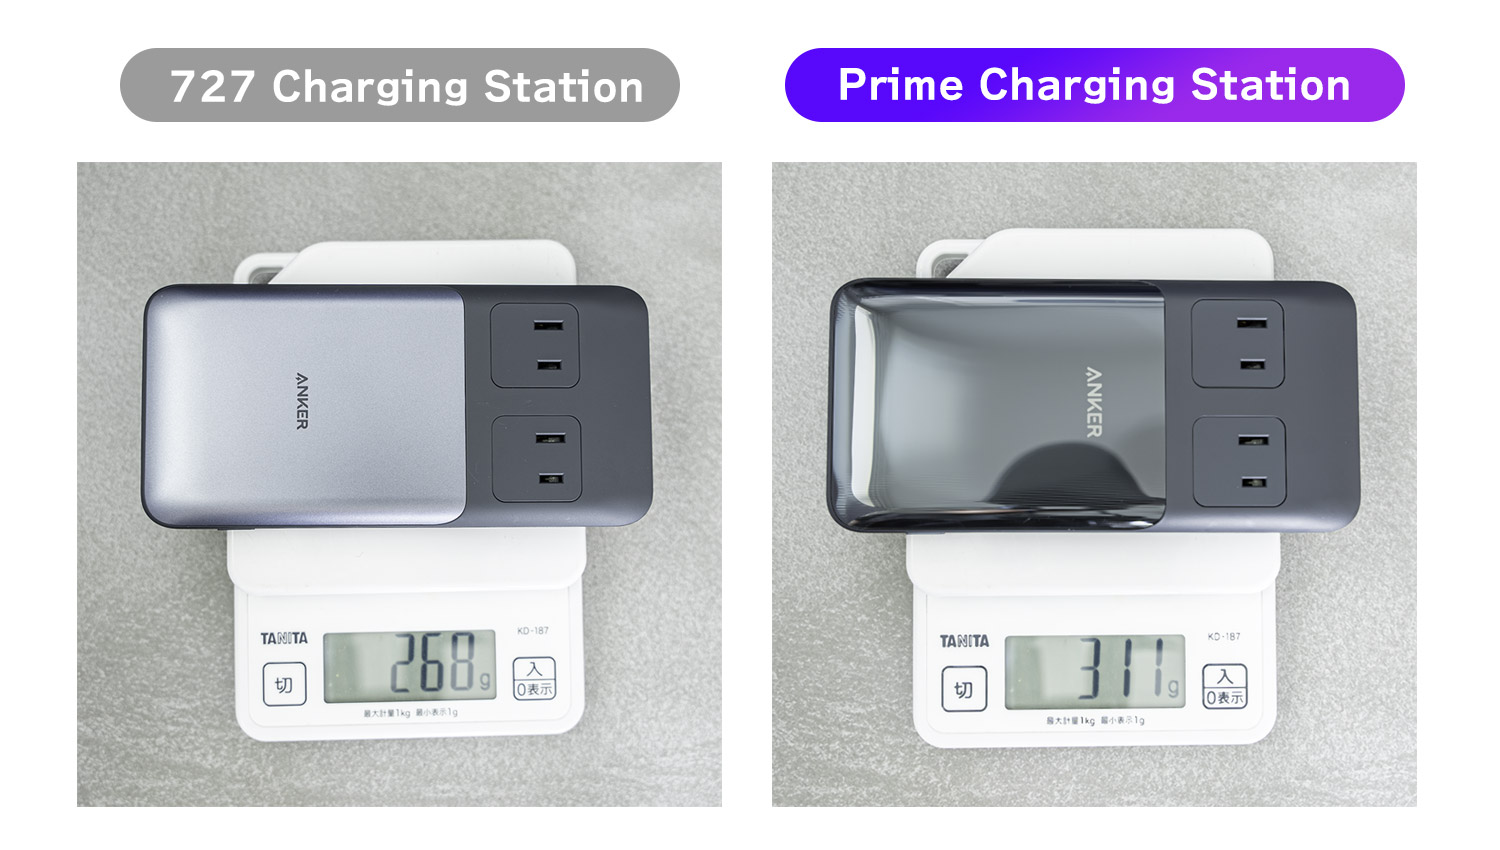 『Anker Prime Charging Station』の3つのデメリット